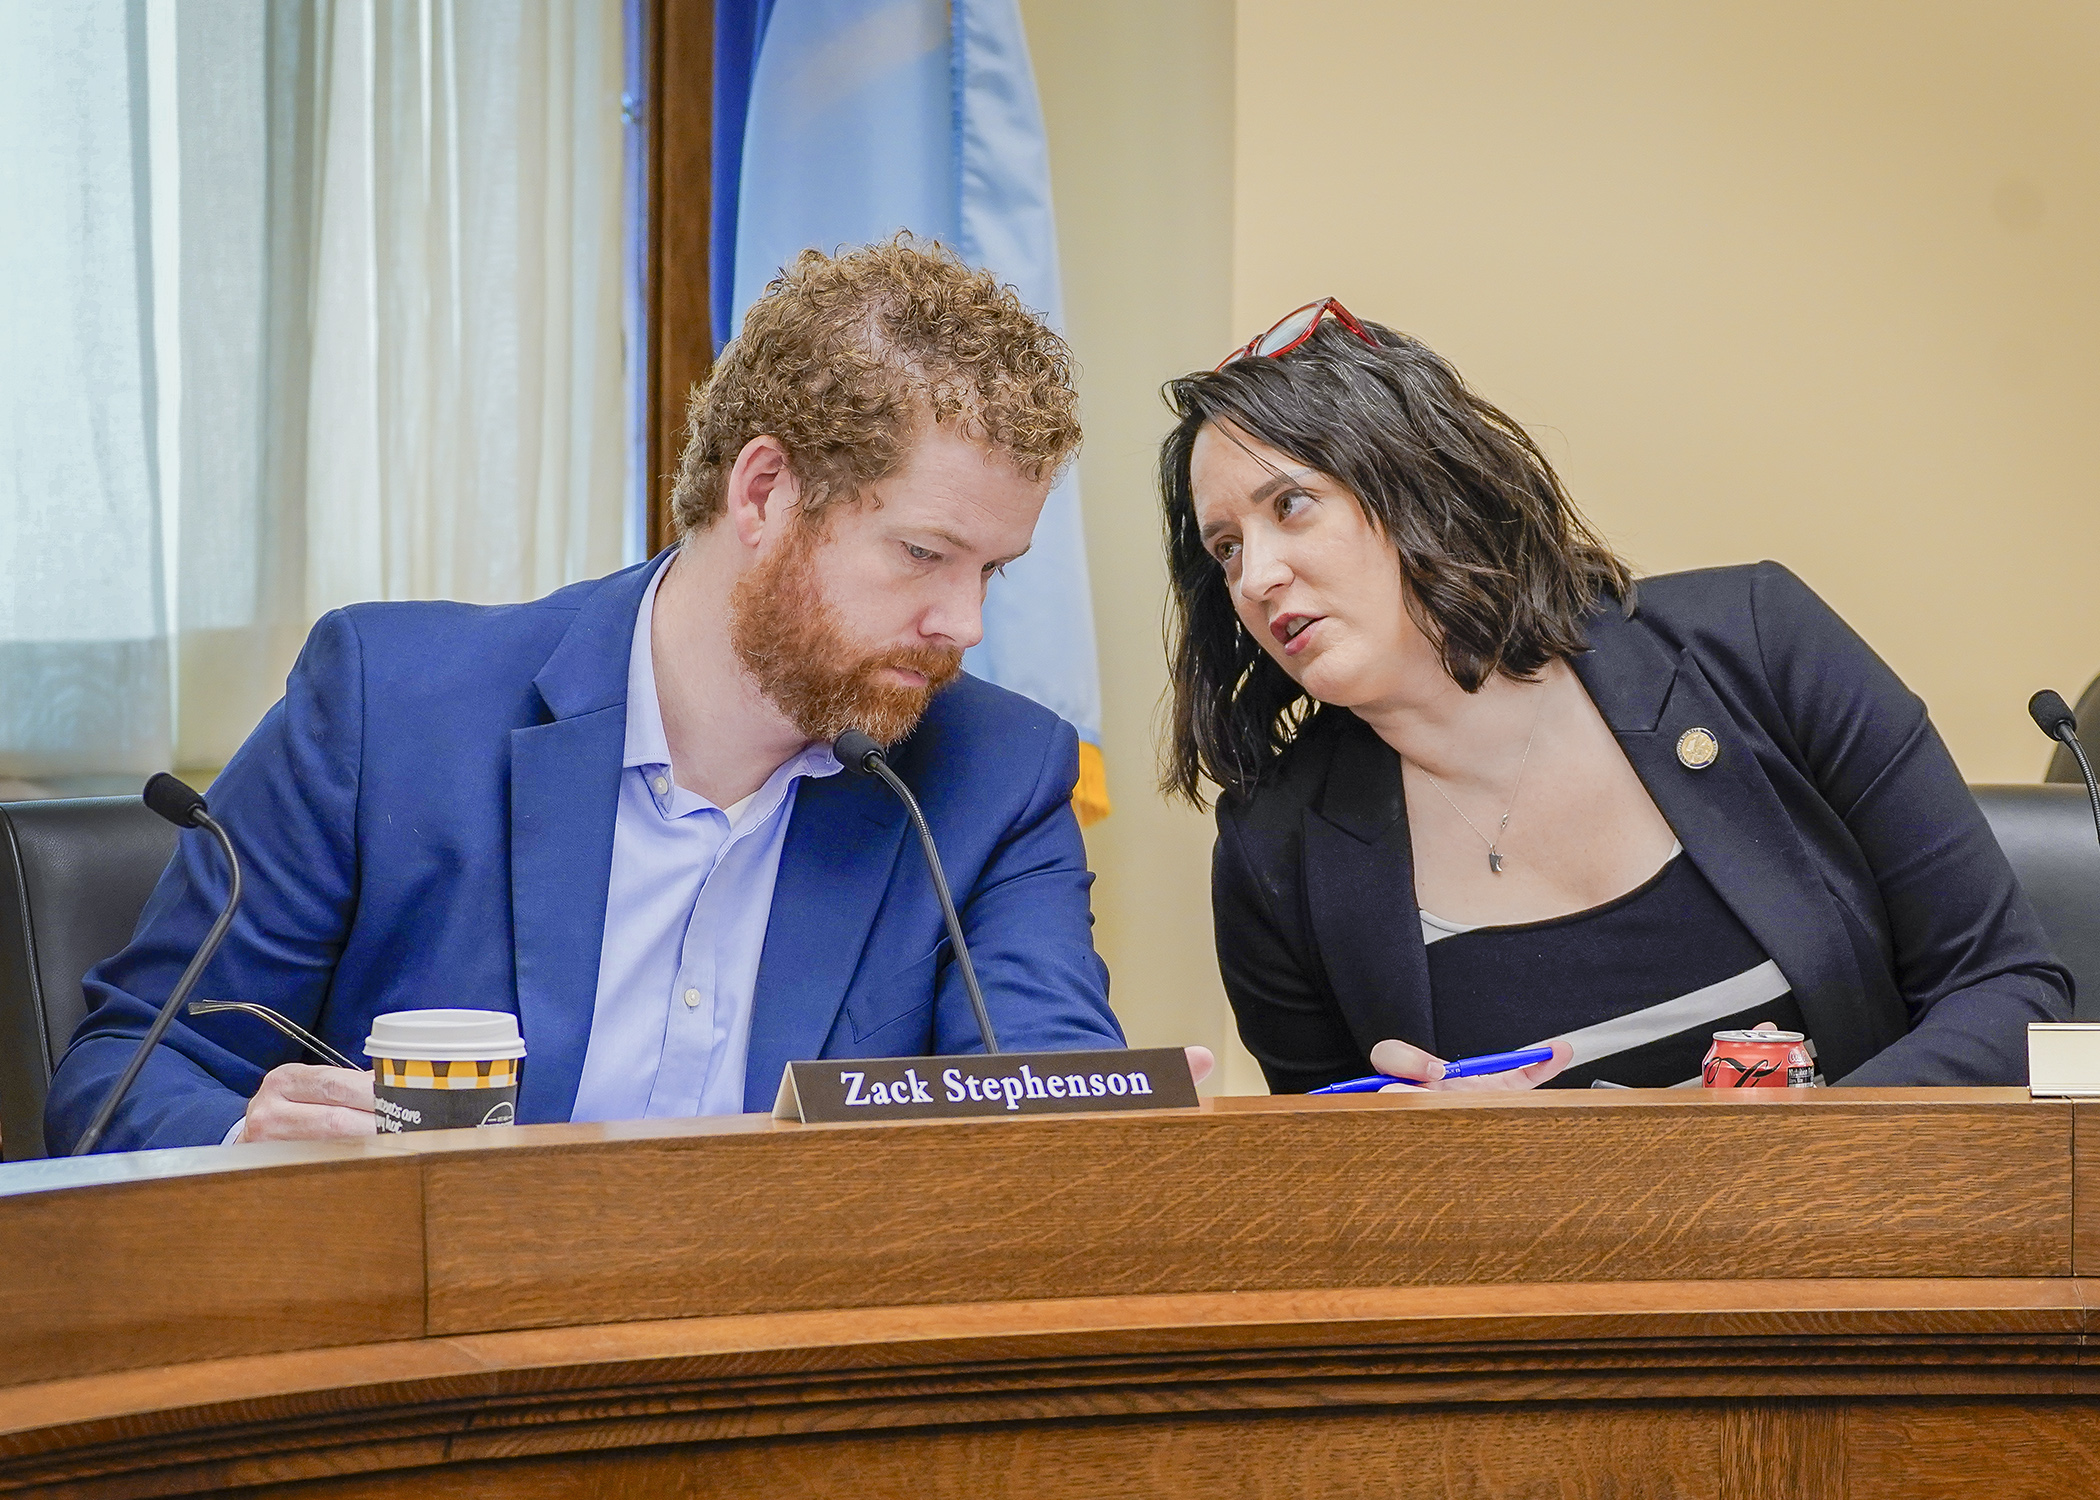 Rep. Zack Stephenson and Sen. Lindsey Port confer May 15 prior to gaveling in the conference committee on the cannabis policy bill. (Photo by Andrew VonBank)